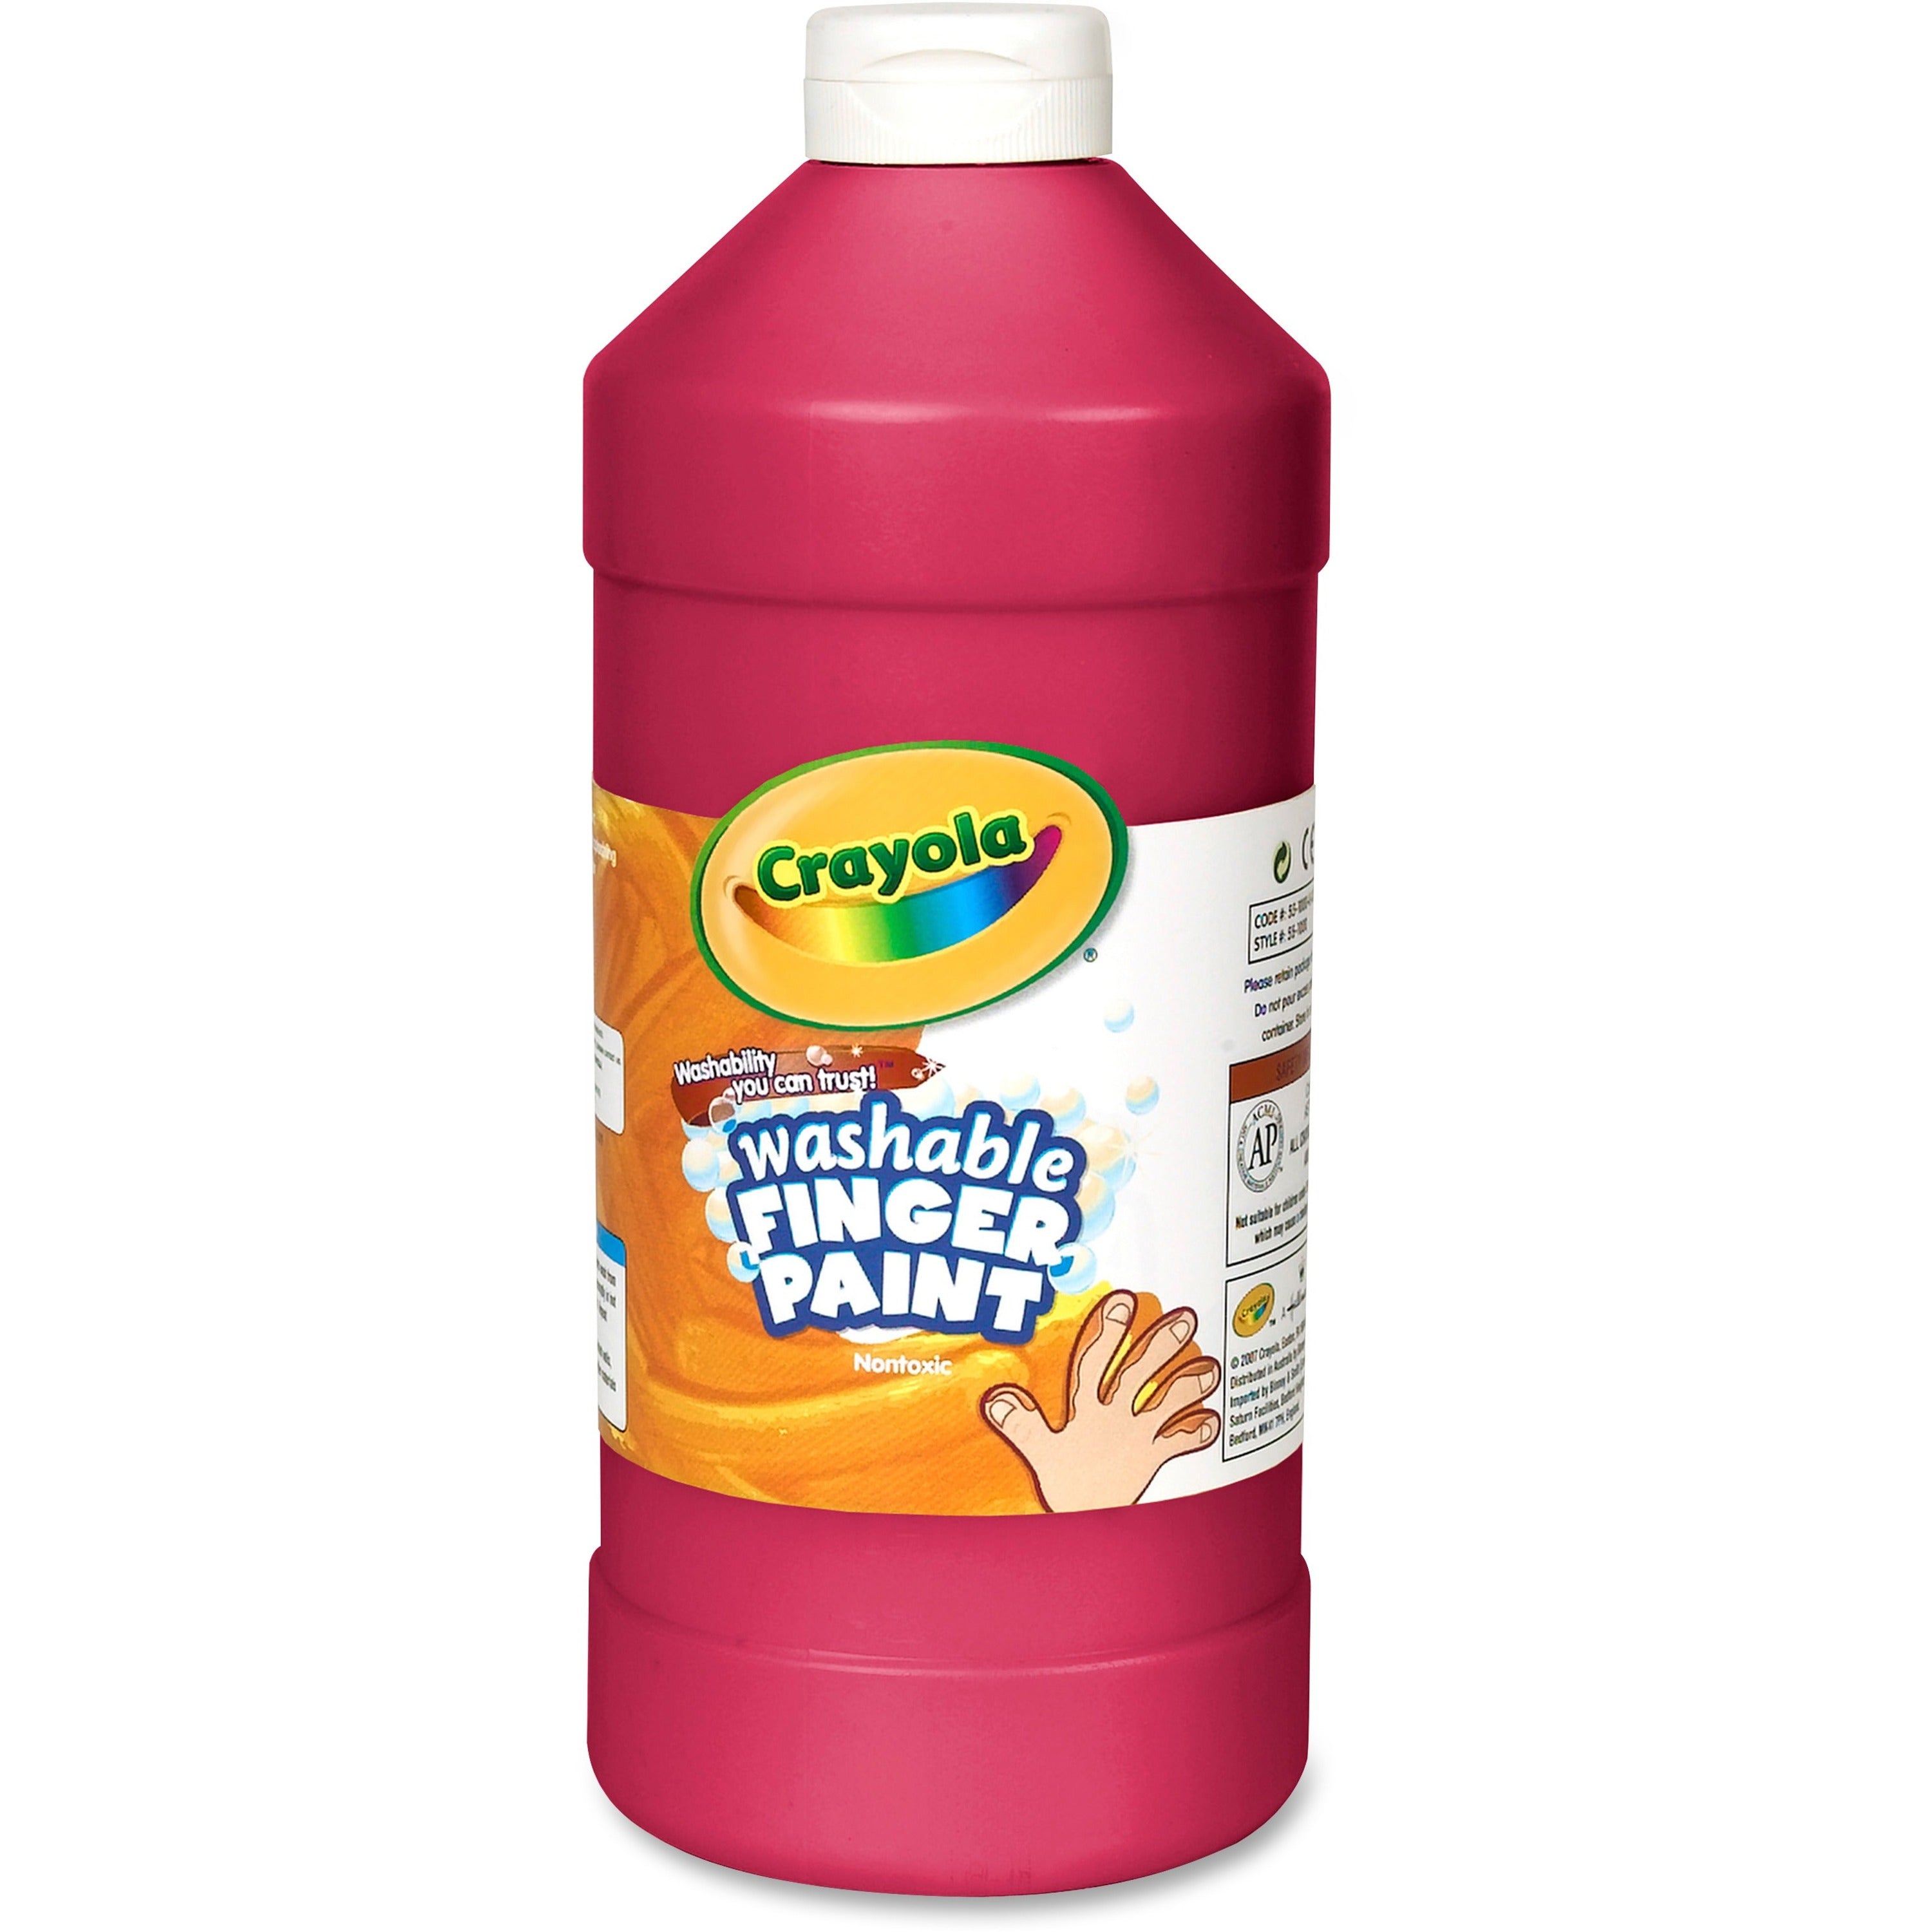 Crayola Washable Finger Paint - 2 lb - 1 Each - Red - 